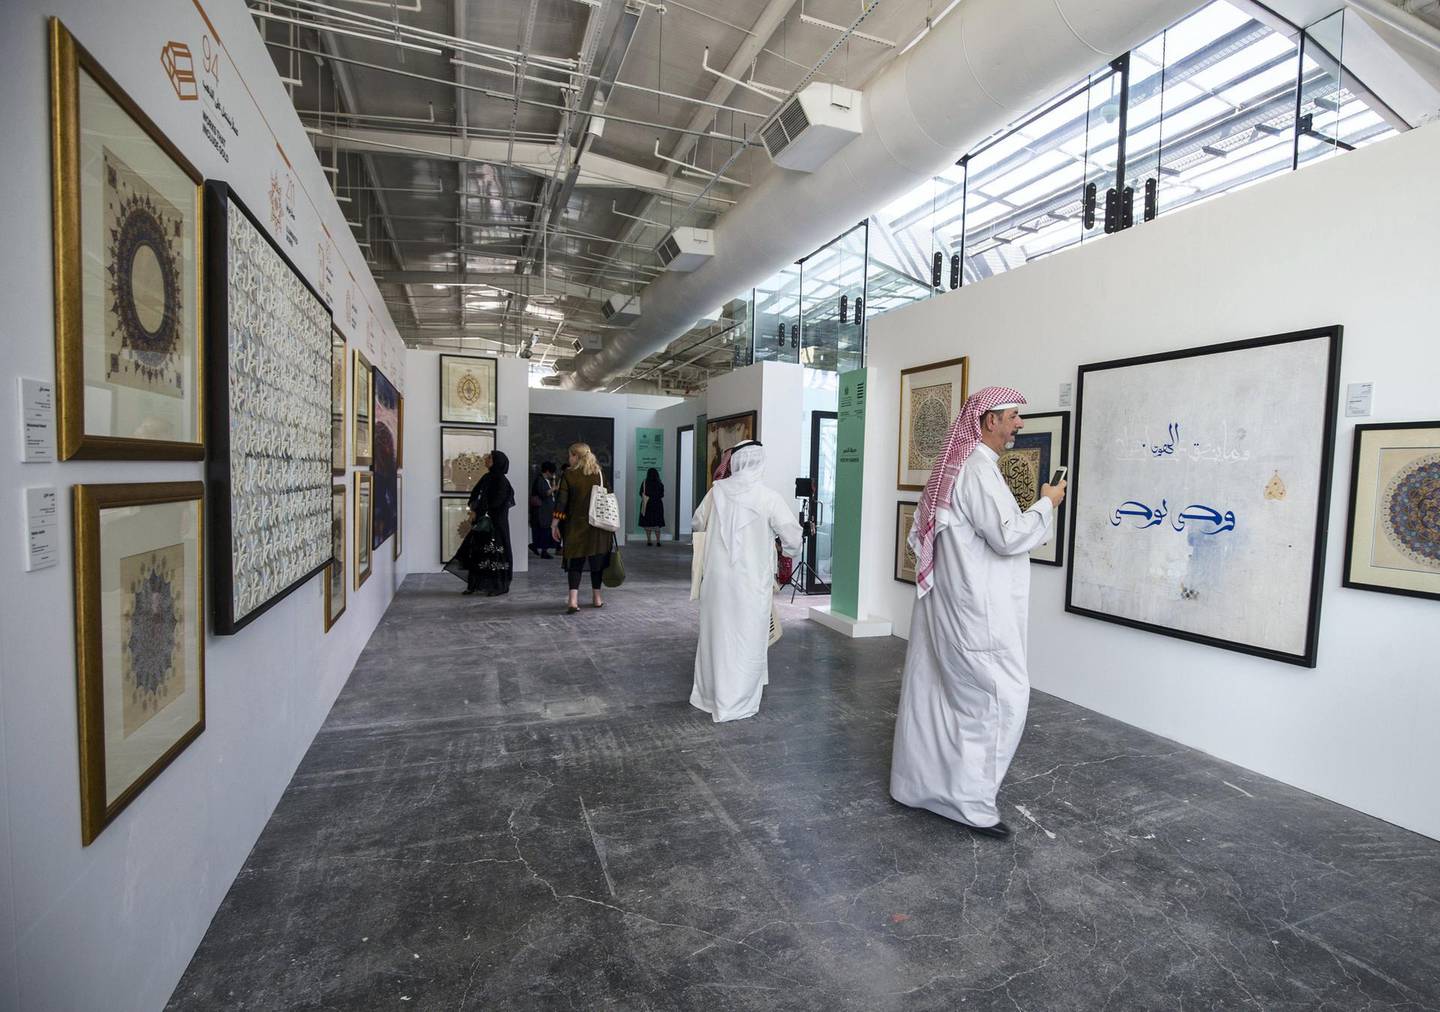 ABU DHABI, UNITED ARAB EMIRATES - Attendees looking at an art on display at the Al Burda Festival, Shaping the Future of Islamic Art and Culture at Warehouse 421, Abu Dhabi.  Leslie Pableo for The National for Melissa Gronlund’s story